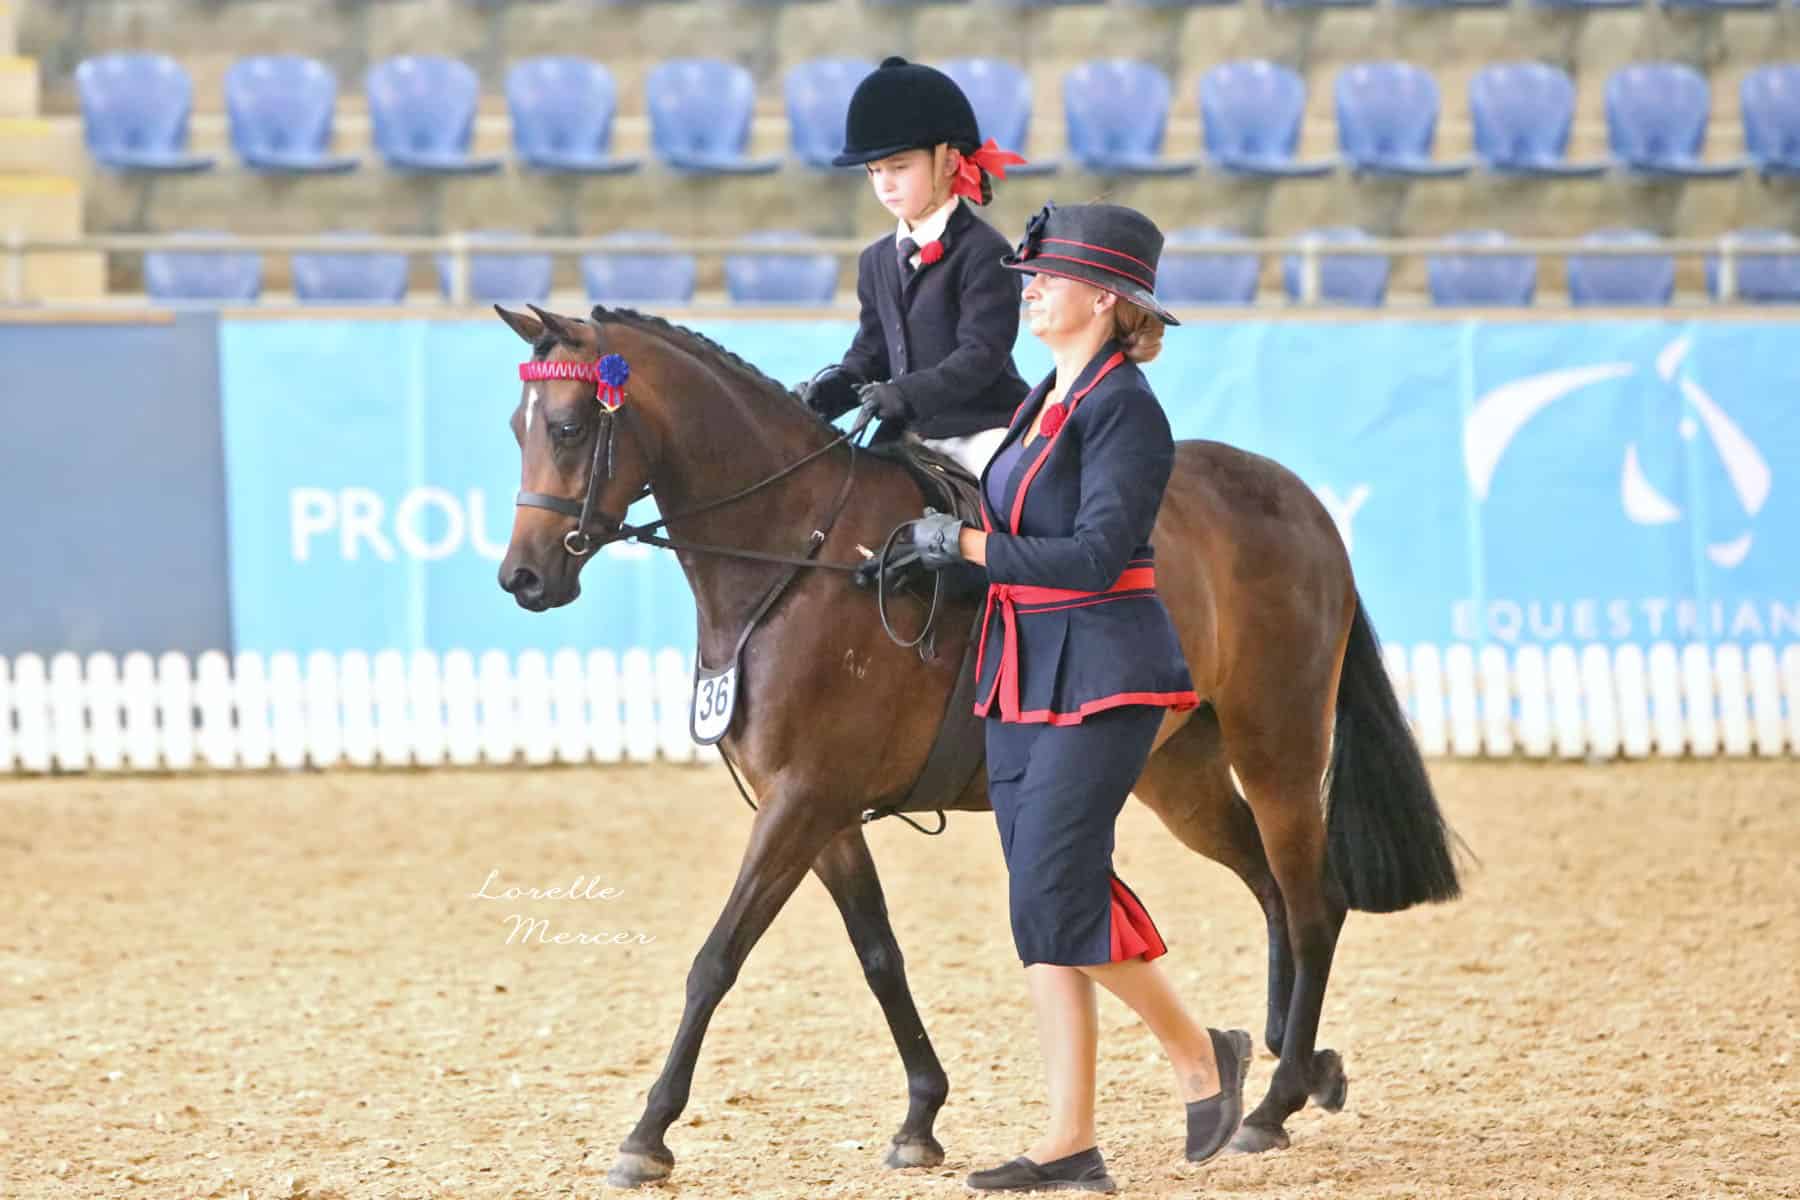 Ramsay show saddle off to The Nationals!